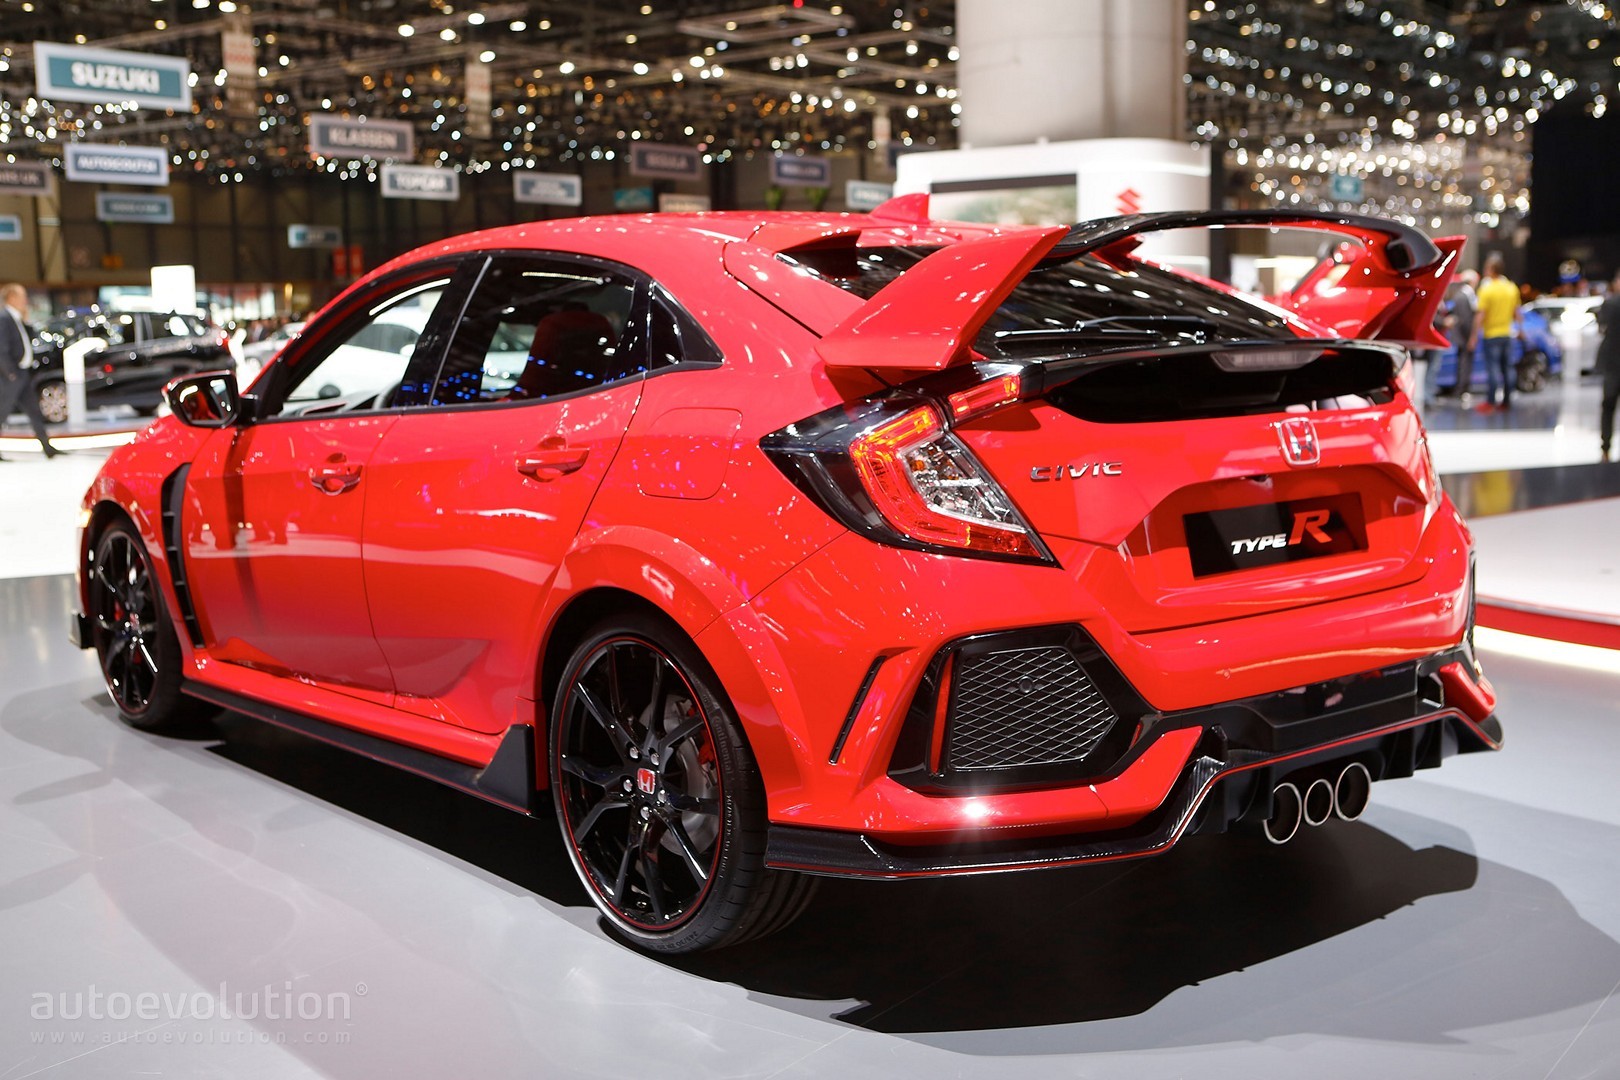 Honda Shows Off 2018 Civic Type R In Promo Video, Exhaust ...